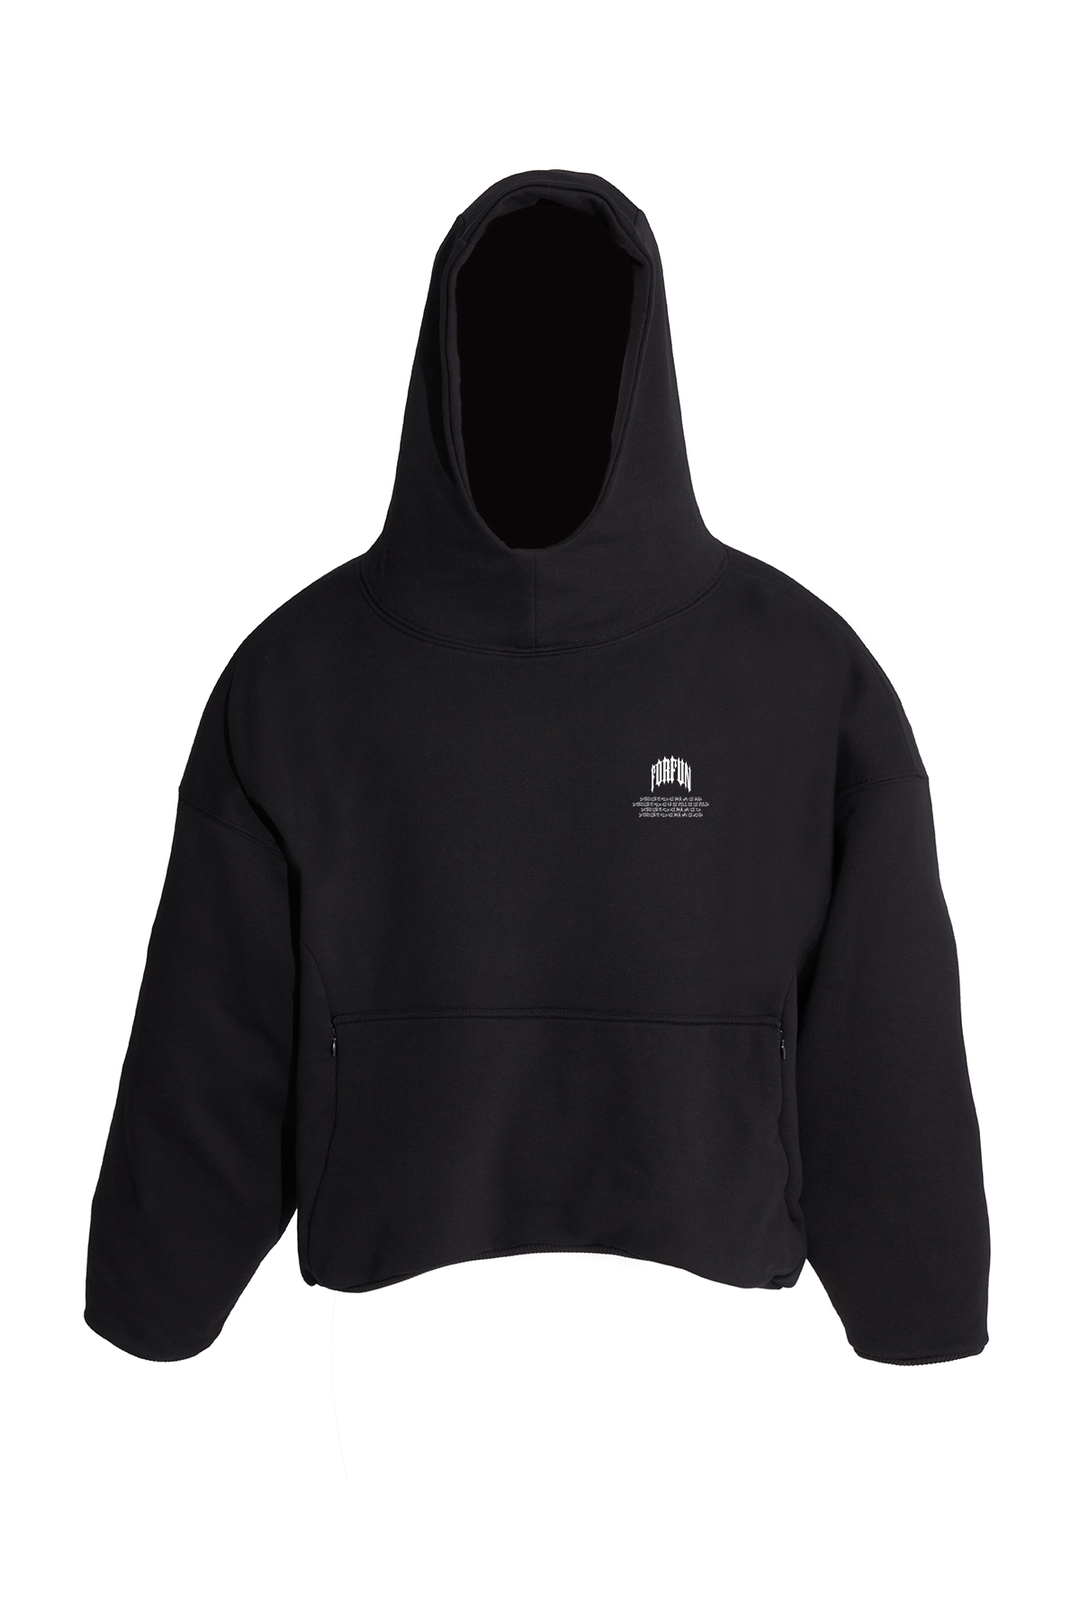 For Fun Neue / Oversized Double Layer Pullover Hoodie